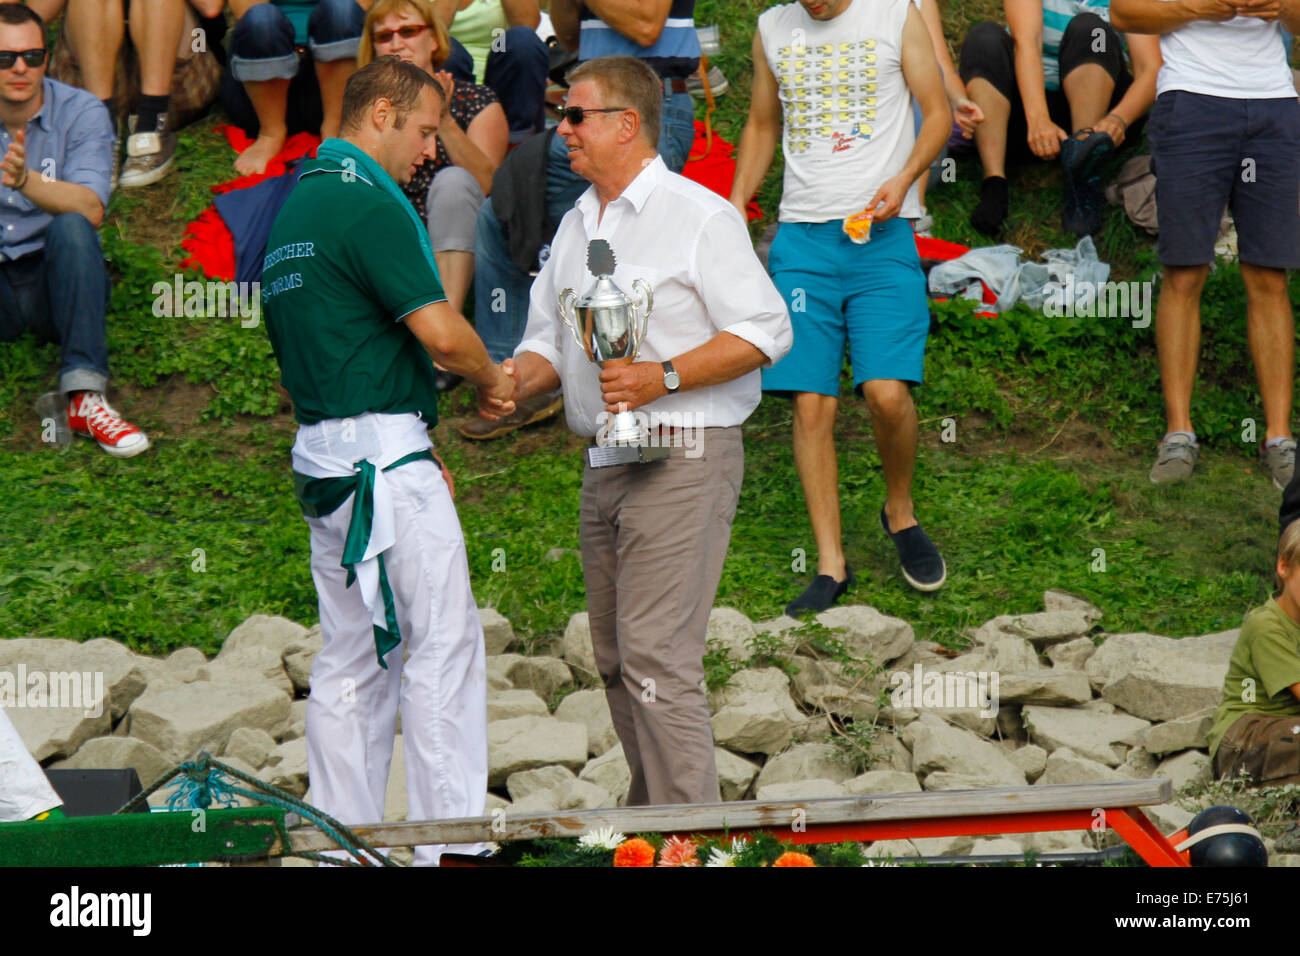 The Lord Mayor of Worms, Michael Kissel (right), congratulates the winner of the 2014 Fischerstechen (fishermen's joust). Fifteen teams each consisting of 2 rowers and one man fighting with a lance, competed in the 65th anniversary Fischerstechen (Fishermen's Joust) held on the final day of the Backfischfest. © Michael Debets/Pacific Press/Alamy Live News Stock Photo